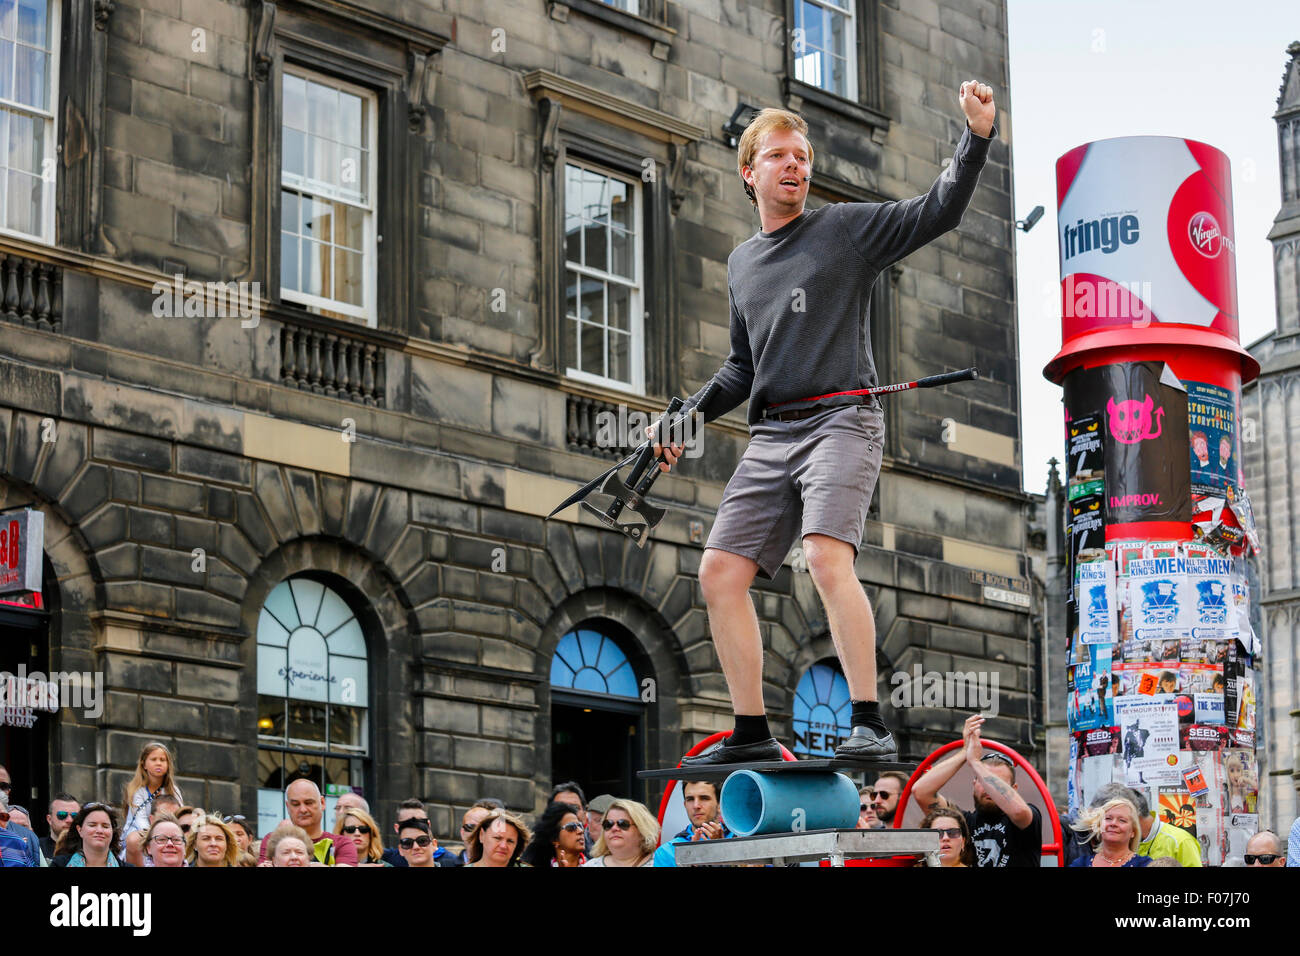 Daniel Zindler from Canada performing a juggling and balancing act in the Royal Mile, Edinburgh during the Edinburgh Fringe festival Stock Photo